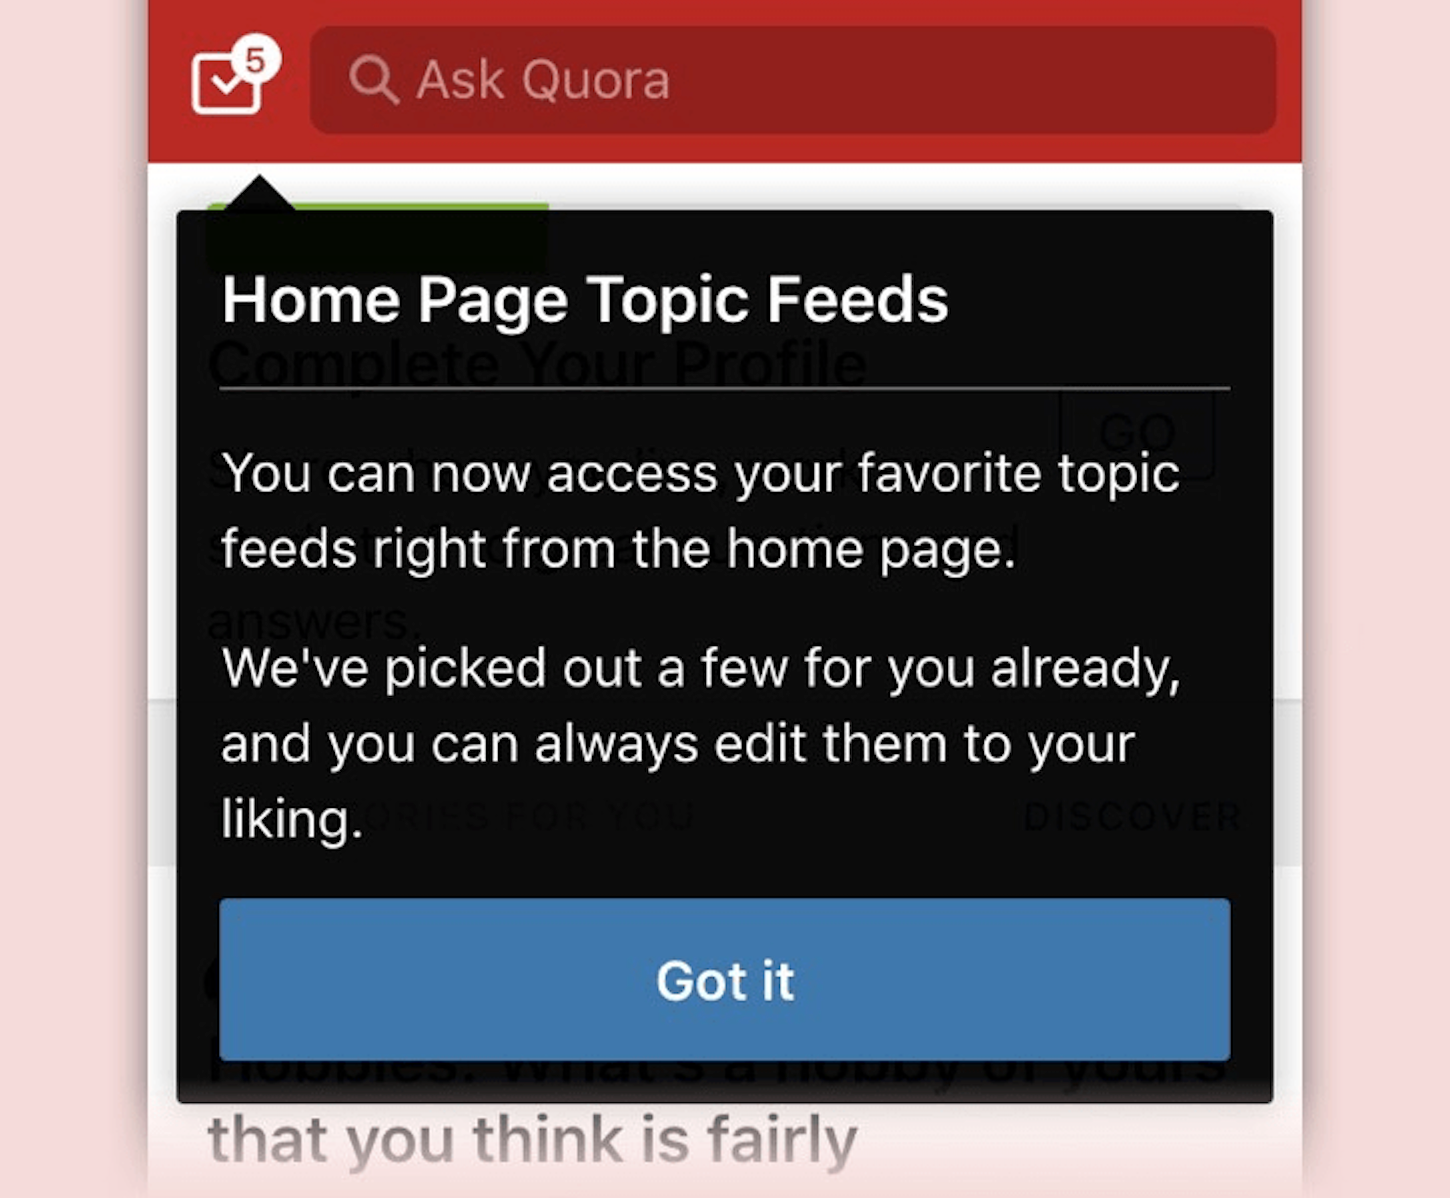 microcopy: screenshot of an update to Quora's home page topic feeds that informs the user of changes